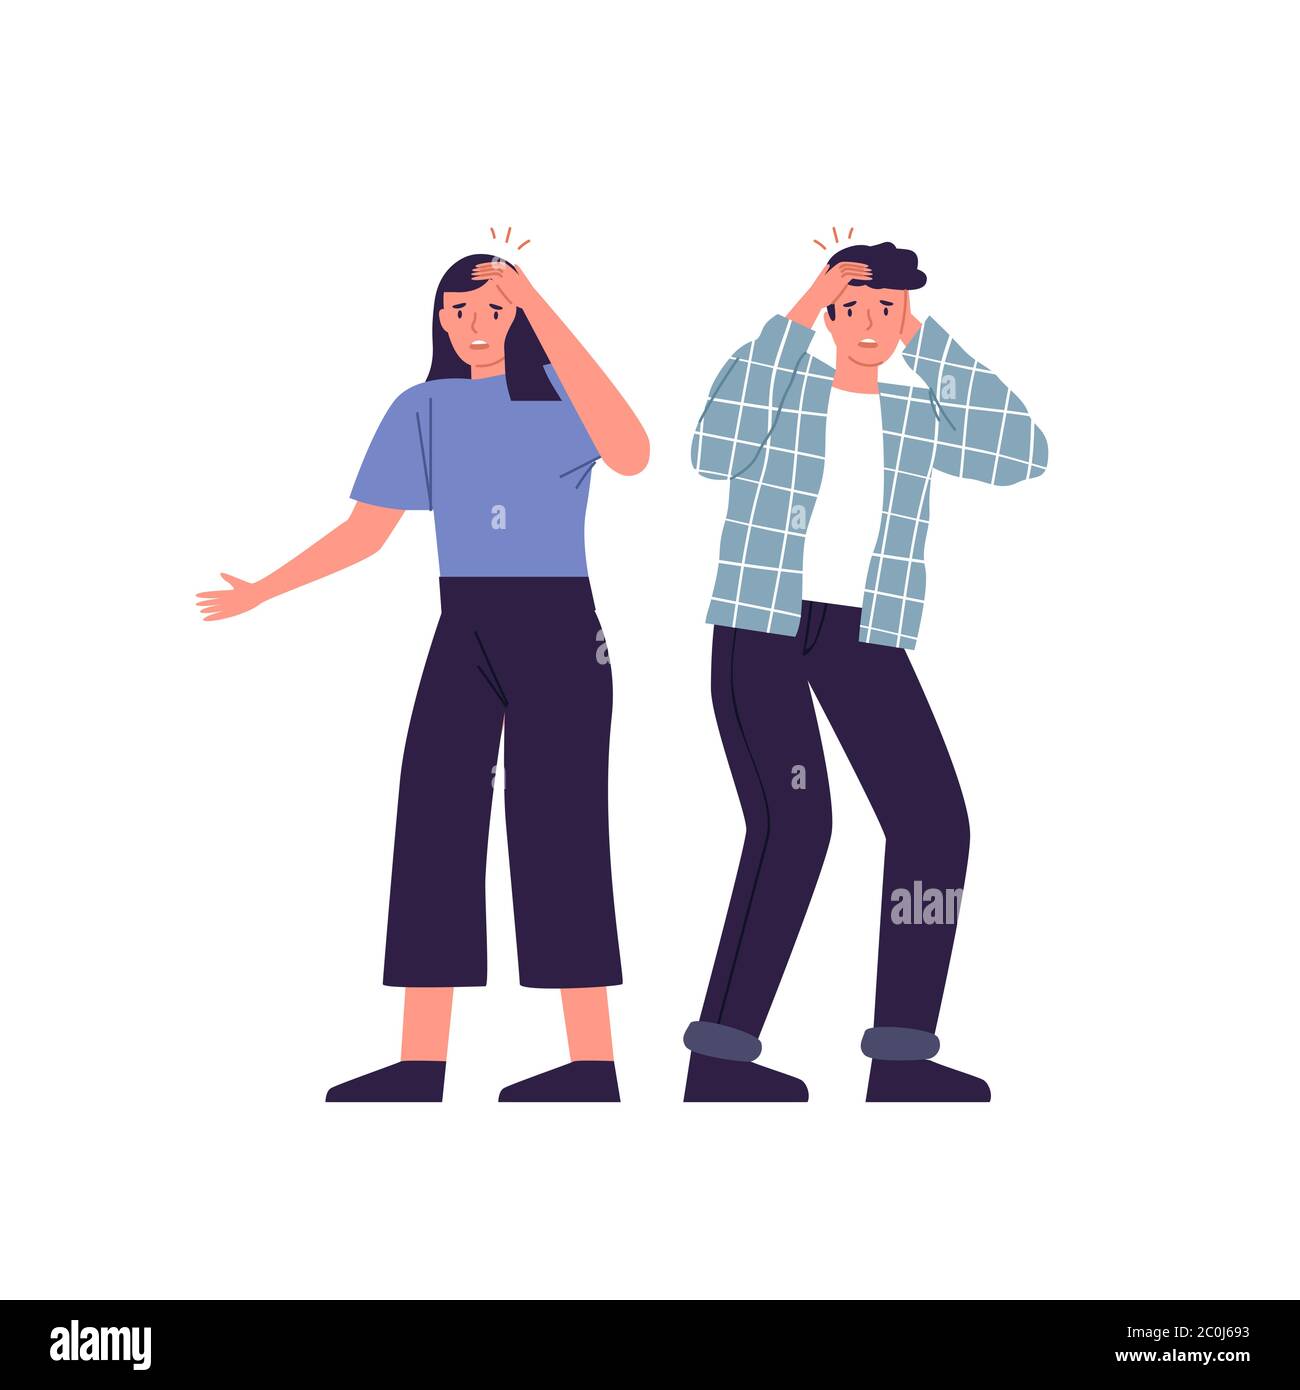 Man and woman having a headache on isolated white background. Sick people touching head for migraine, stress or sad emotion. Stock Vector